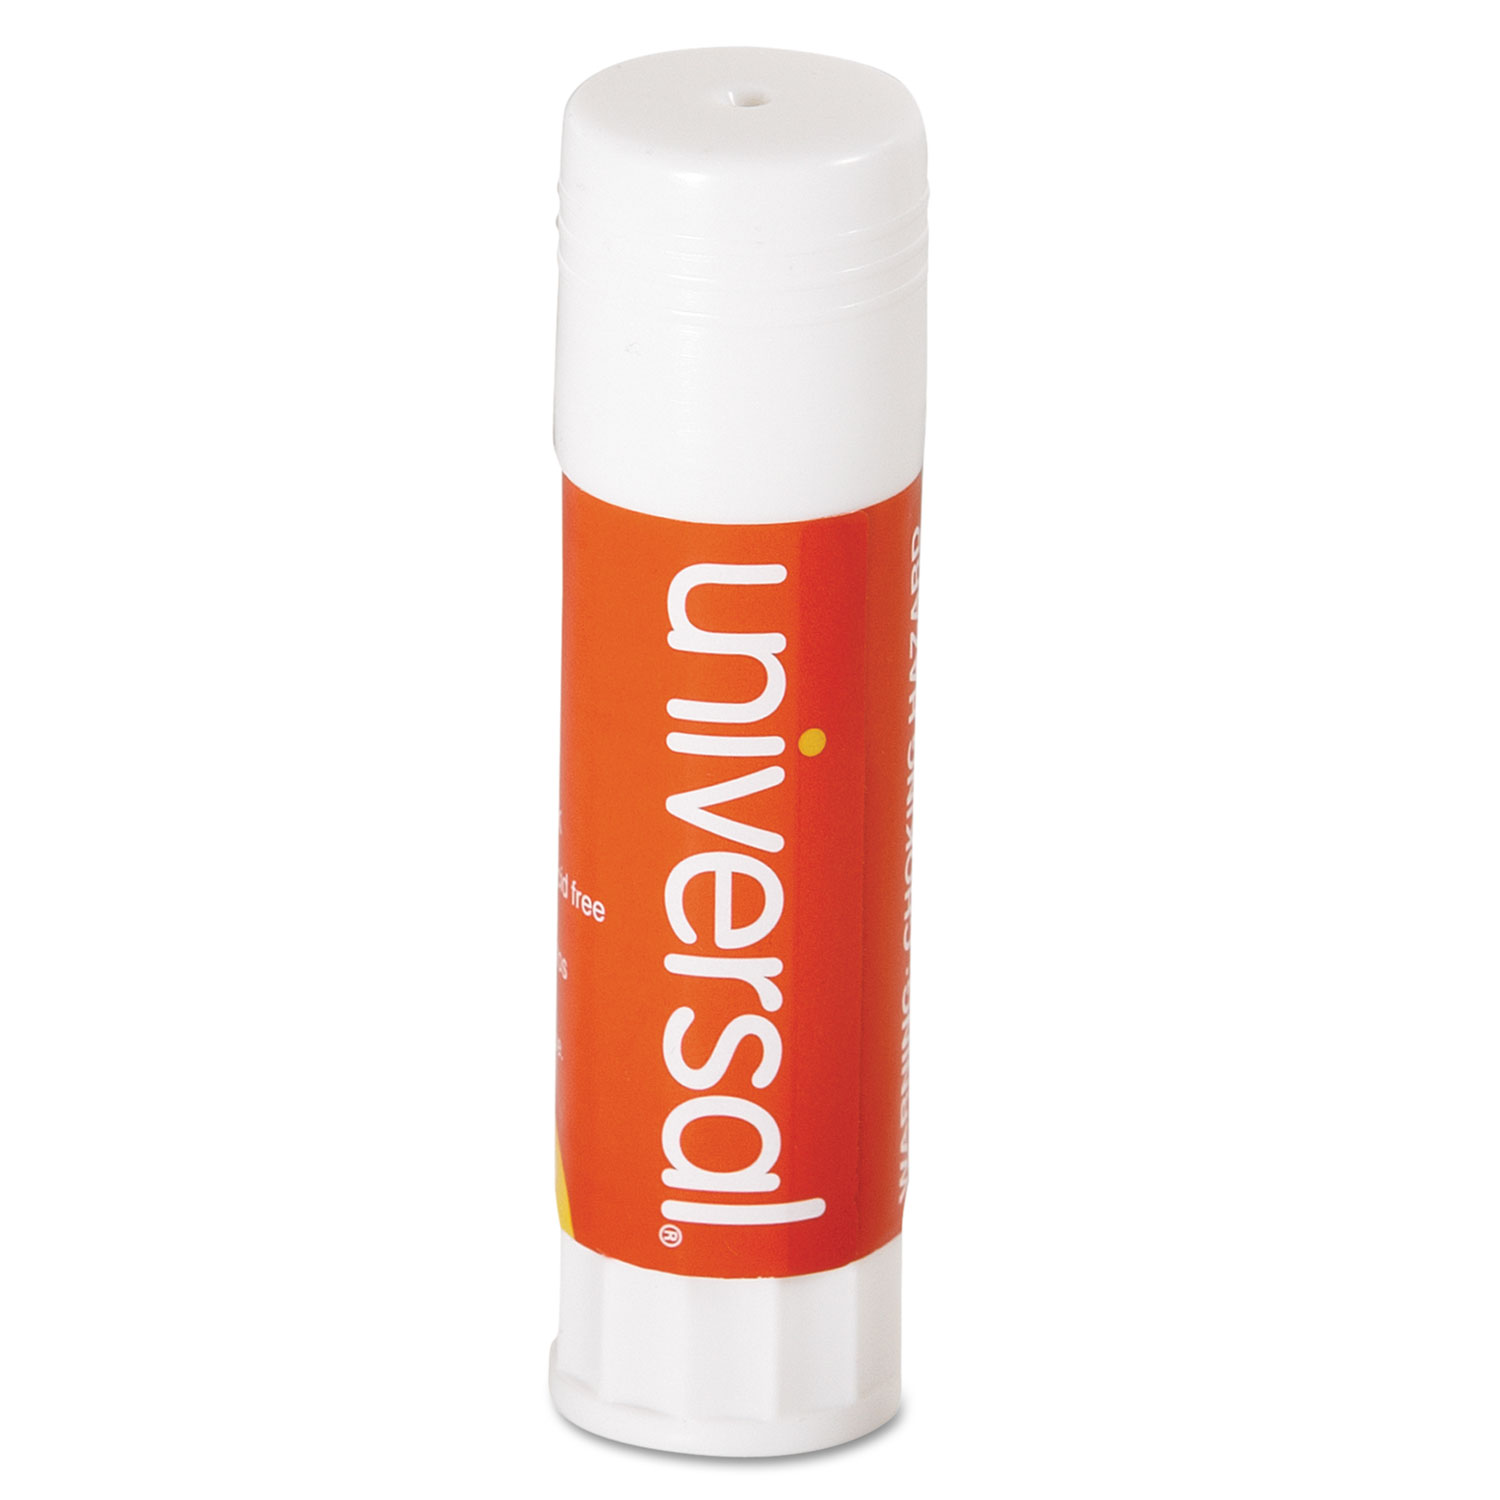  Universal UNV75750 Glue Stick, 0.74 oz, Applies and Dries Clear, 12/Pack (UNV75750) 